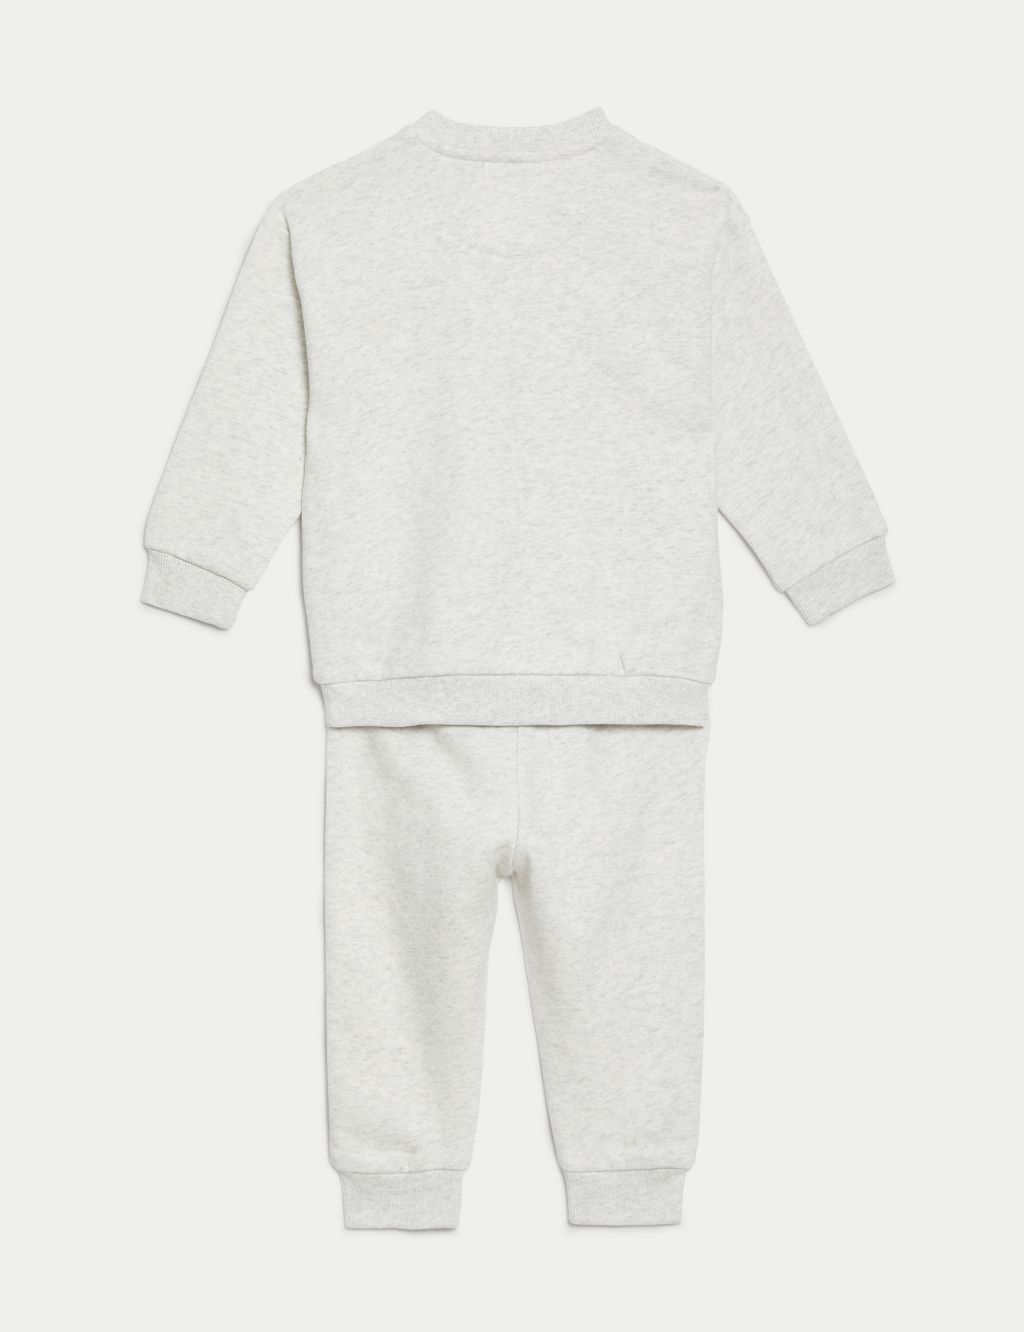 2pc Cotton Rich Sweater and Jogger Outfit (0-3 Yrs) image 2